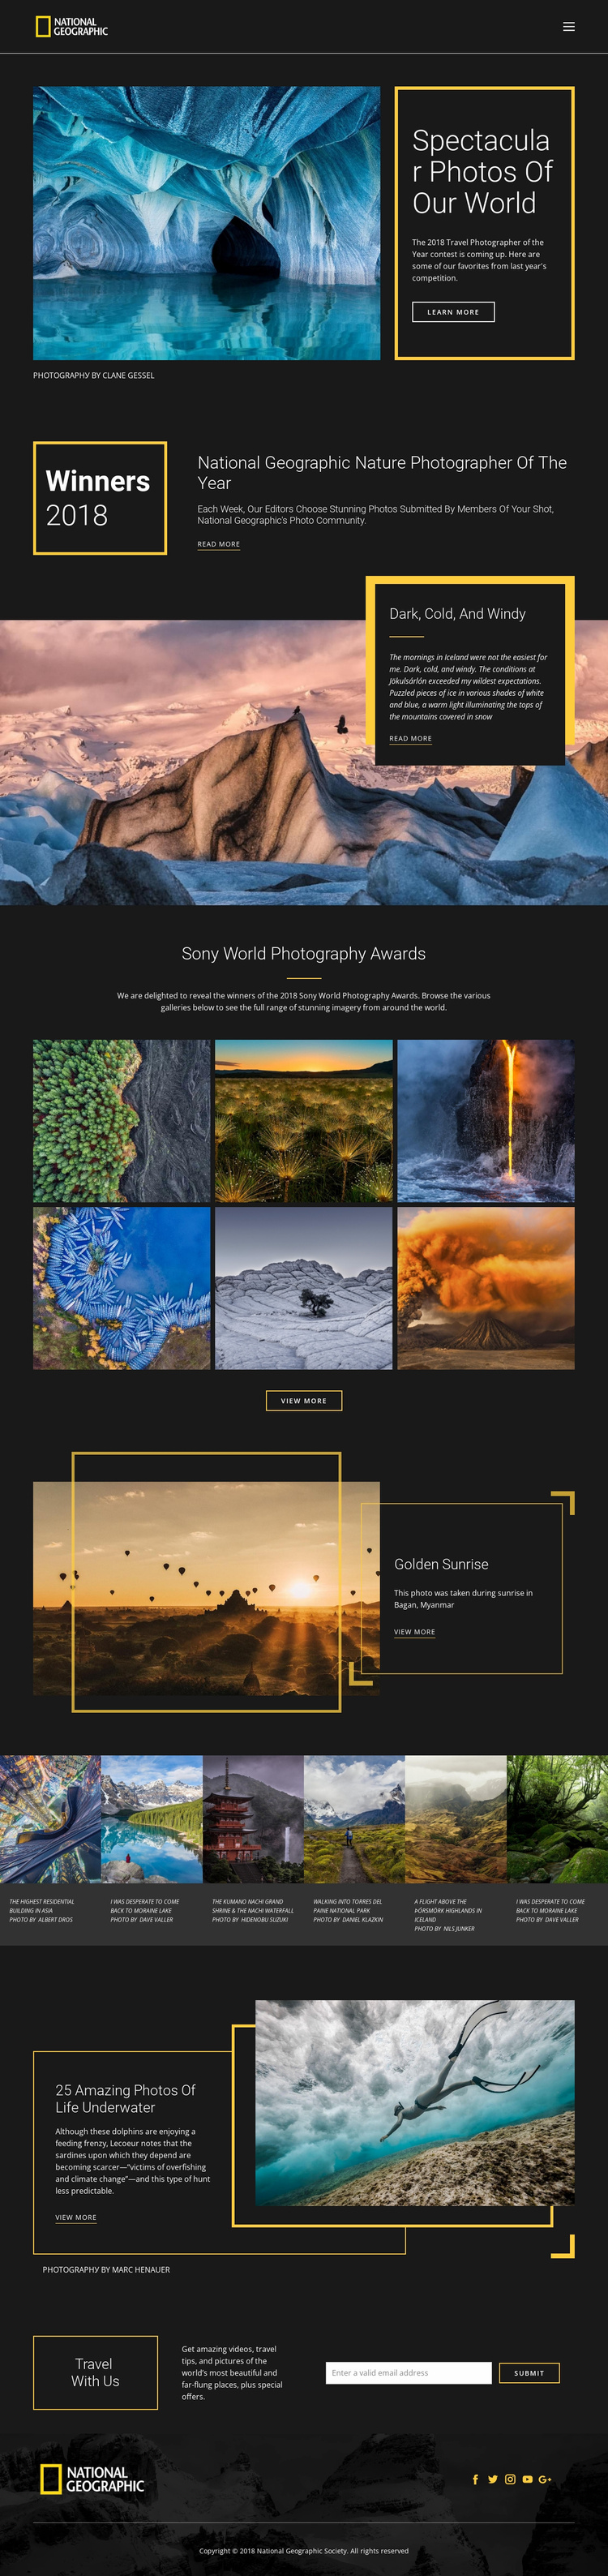 Pictures of nature Website Template